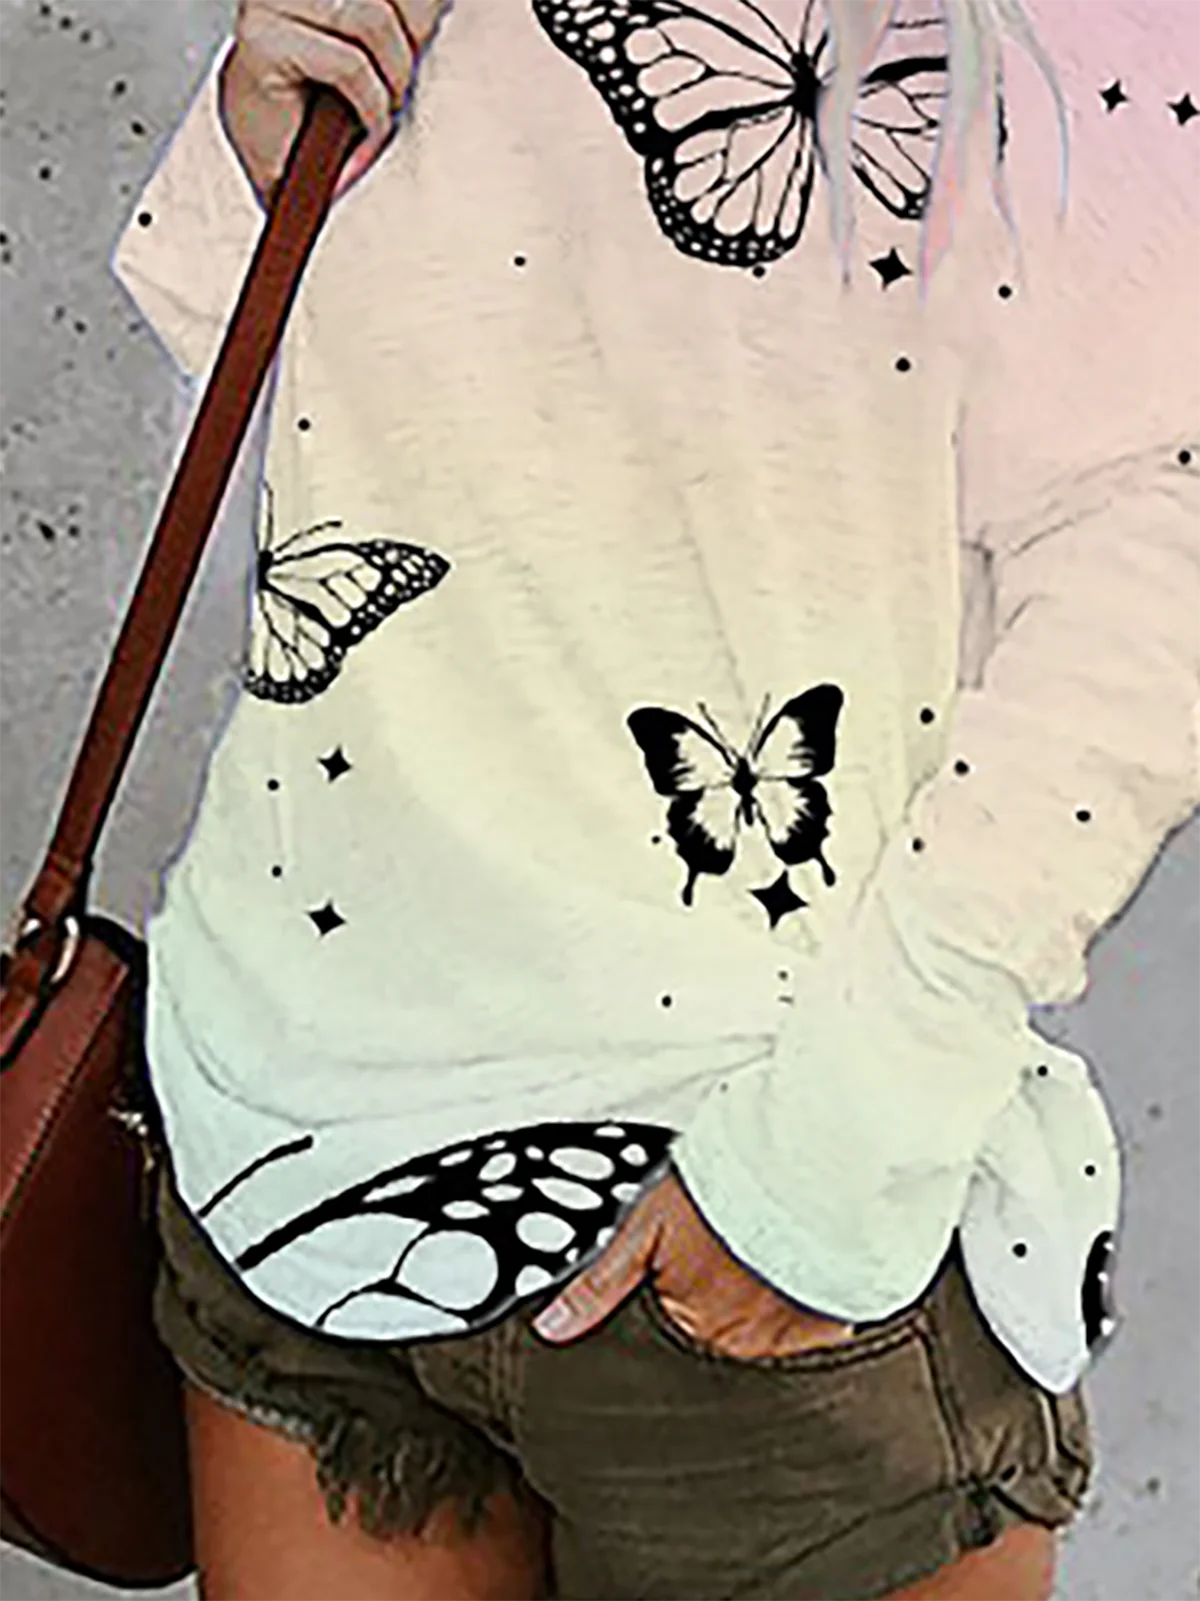 Plus size Butterfly Printed T-shirt